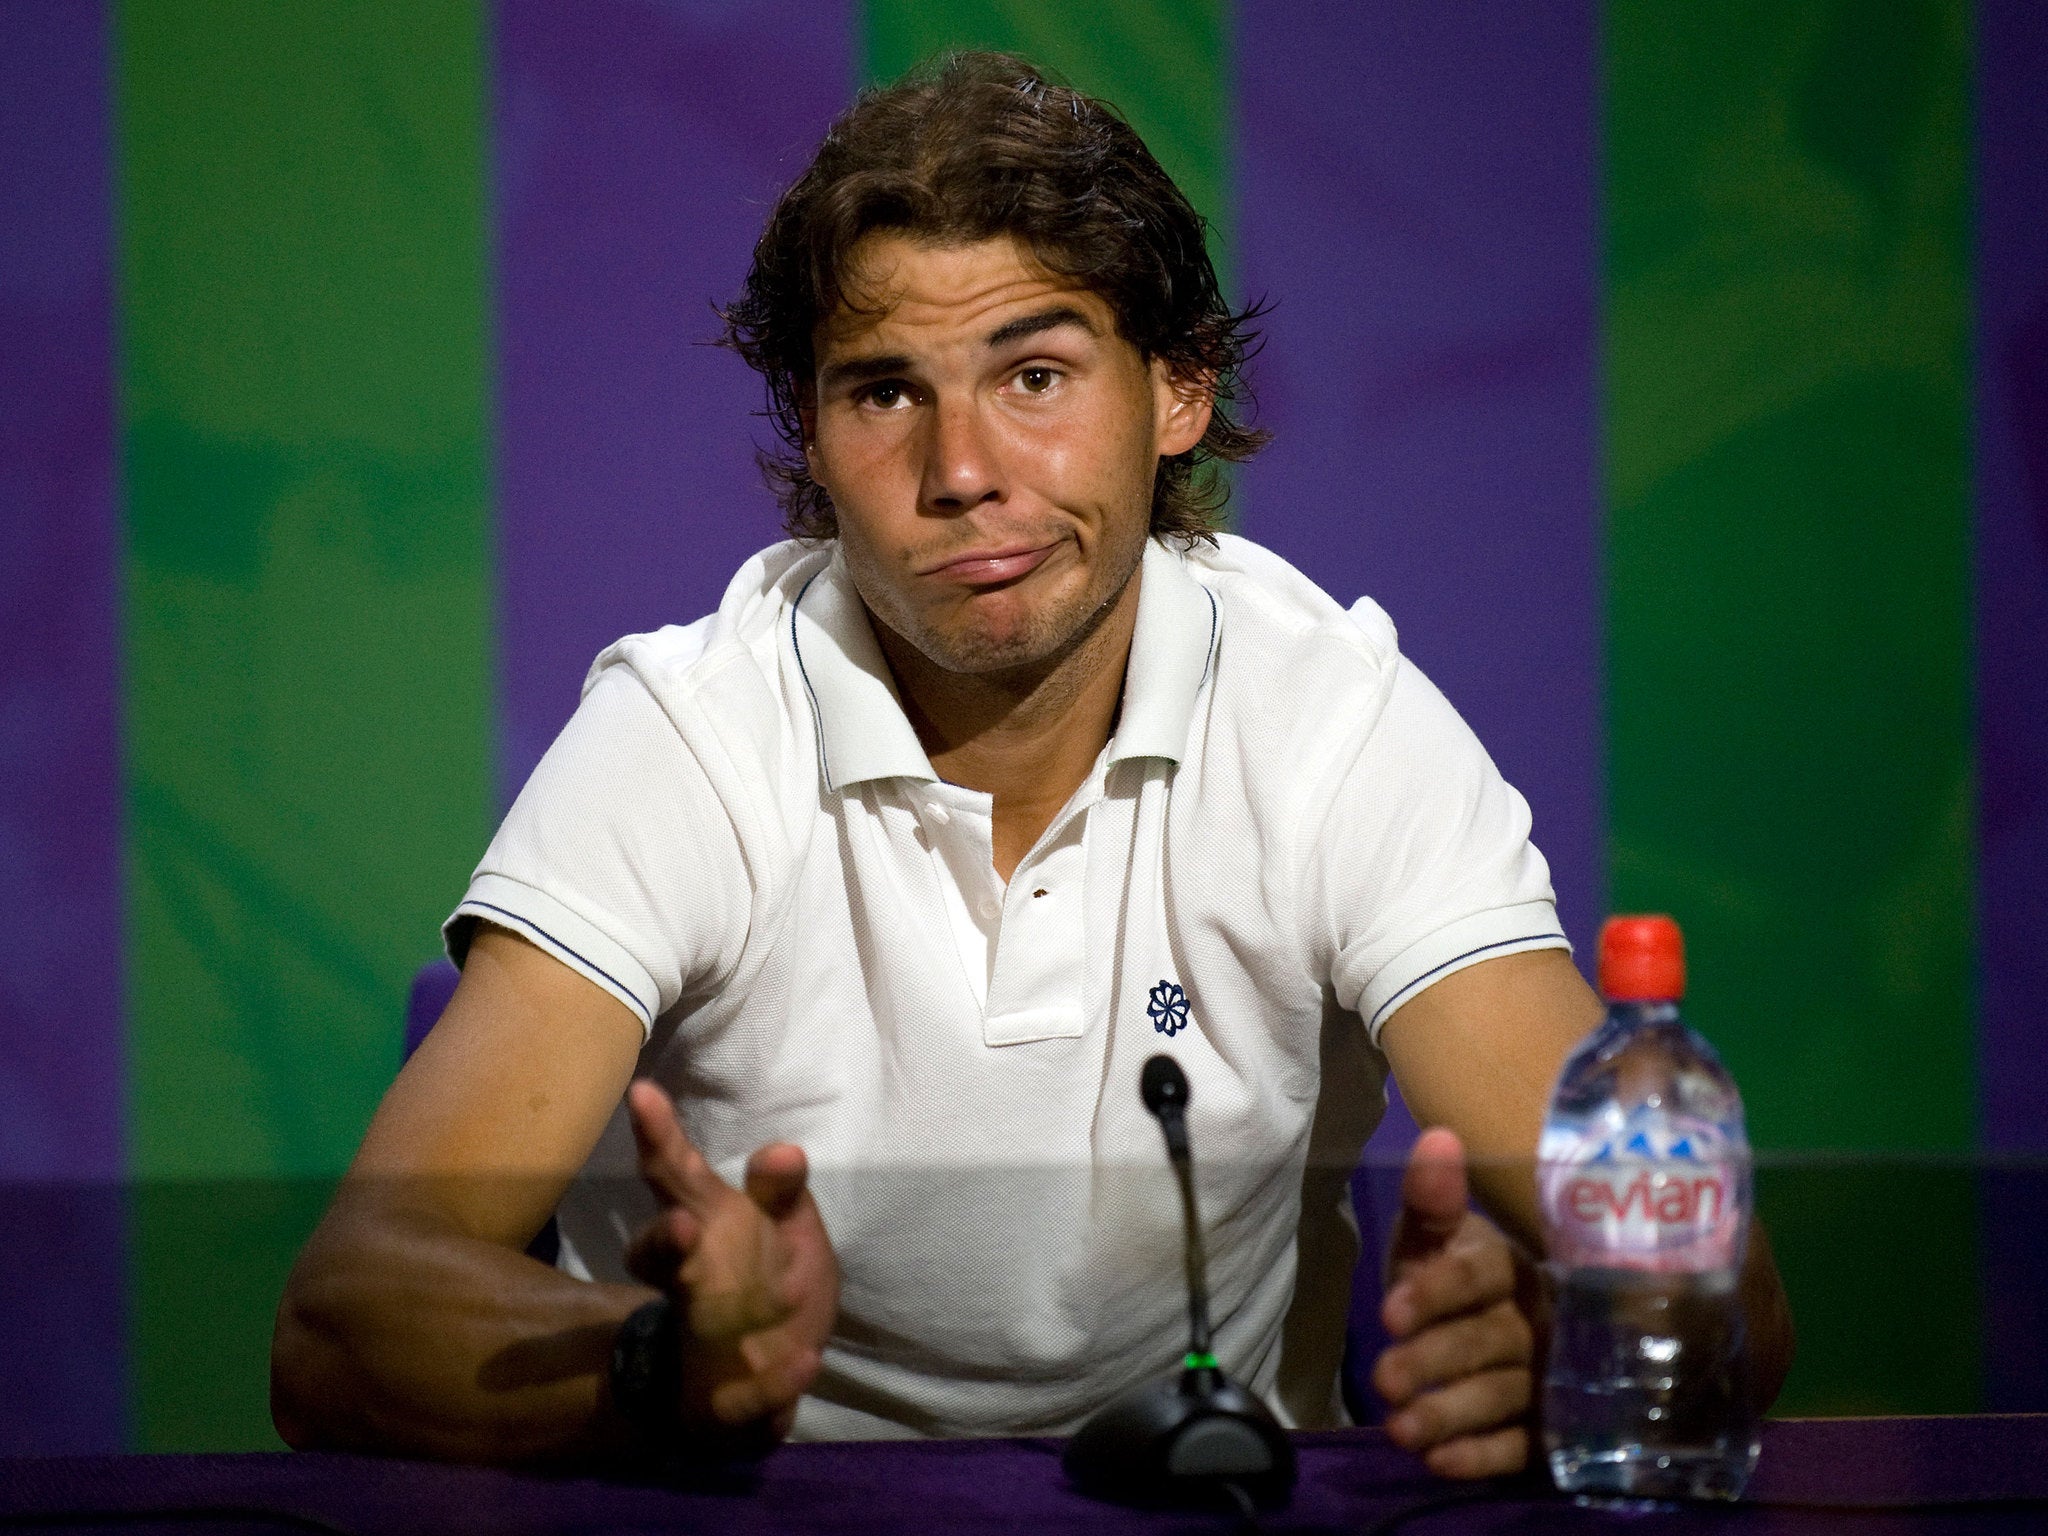 Spain's Rafael Nadal speaks during a press conference after he was beaten in his second round men's singles match by Czech Republic's Lukas Rosol on day four of the 2012 Wimbledon Championships